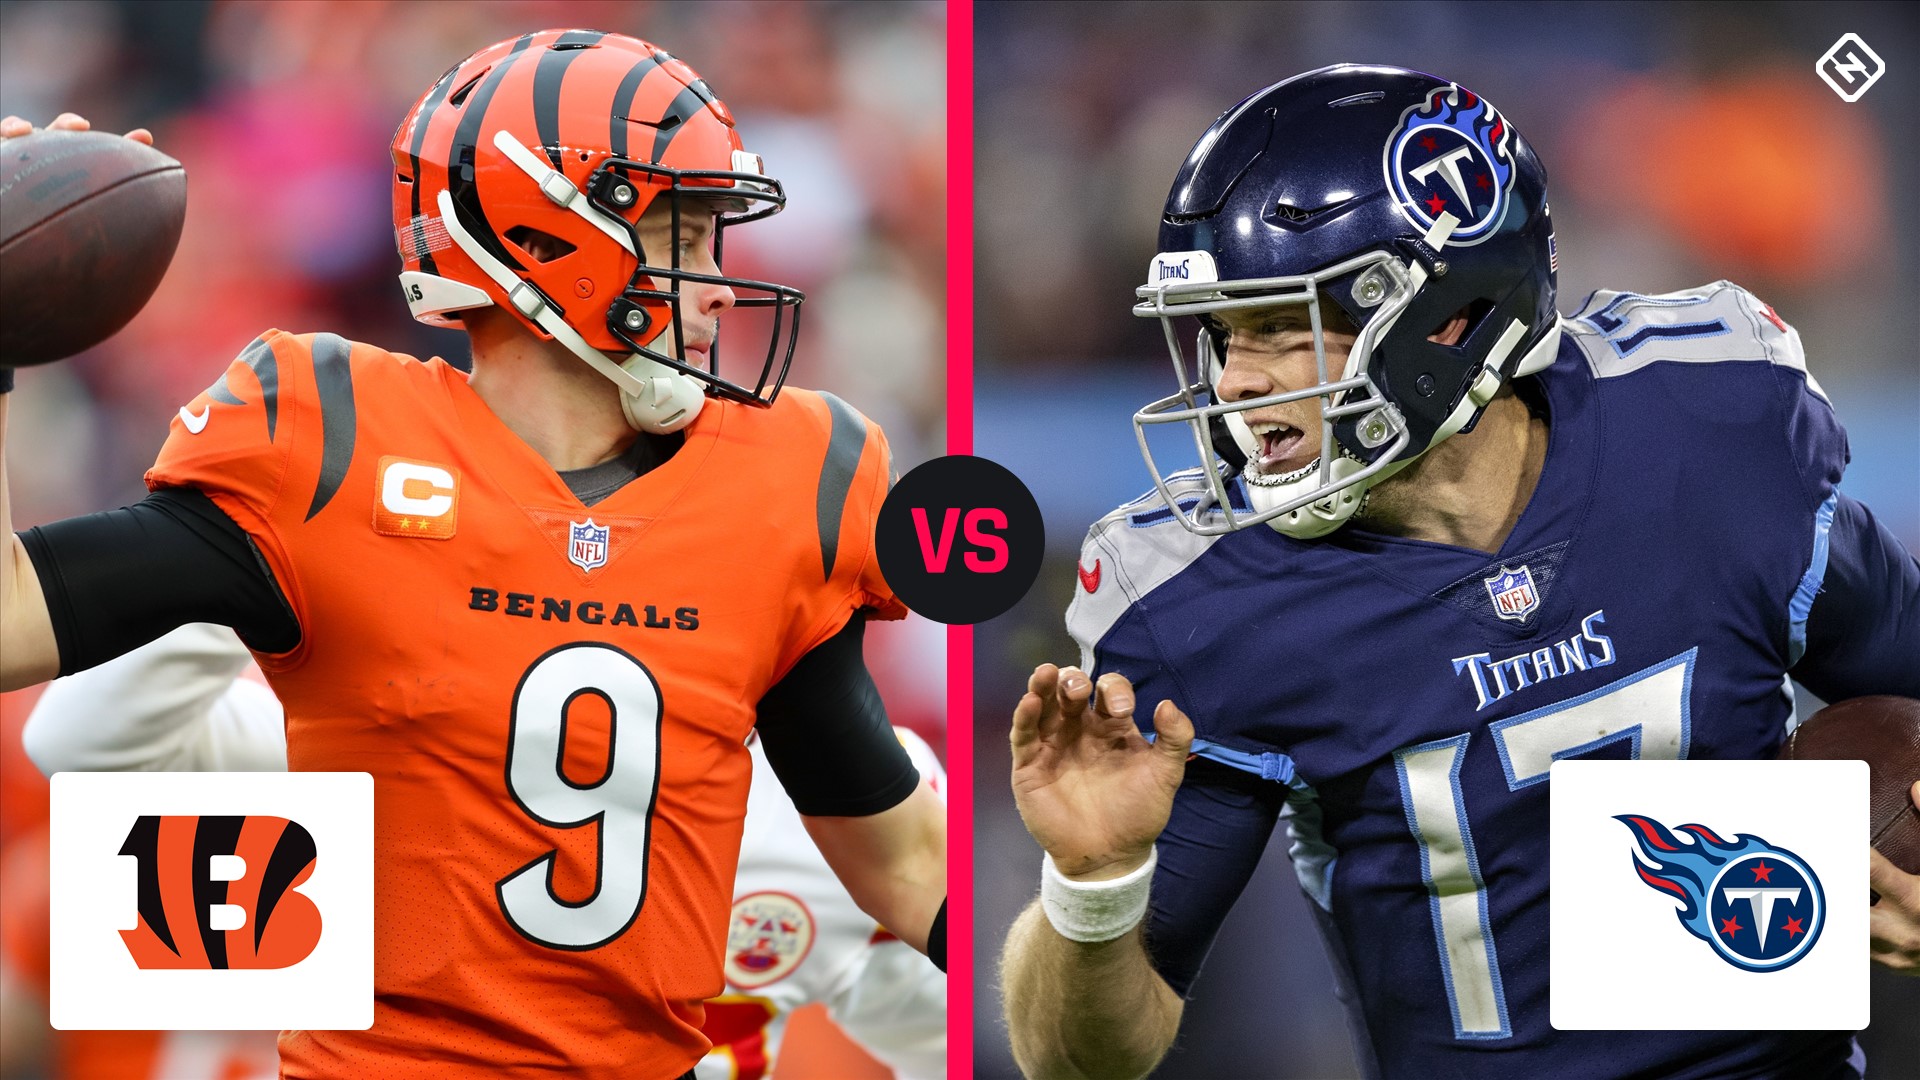 Bengals vs. Titans odds, prediction, betting trends for NFL divisional playoff game